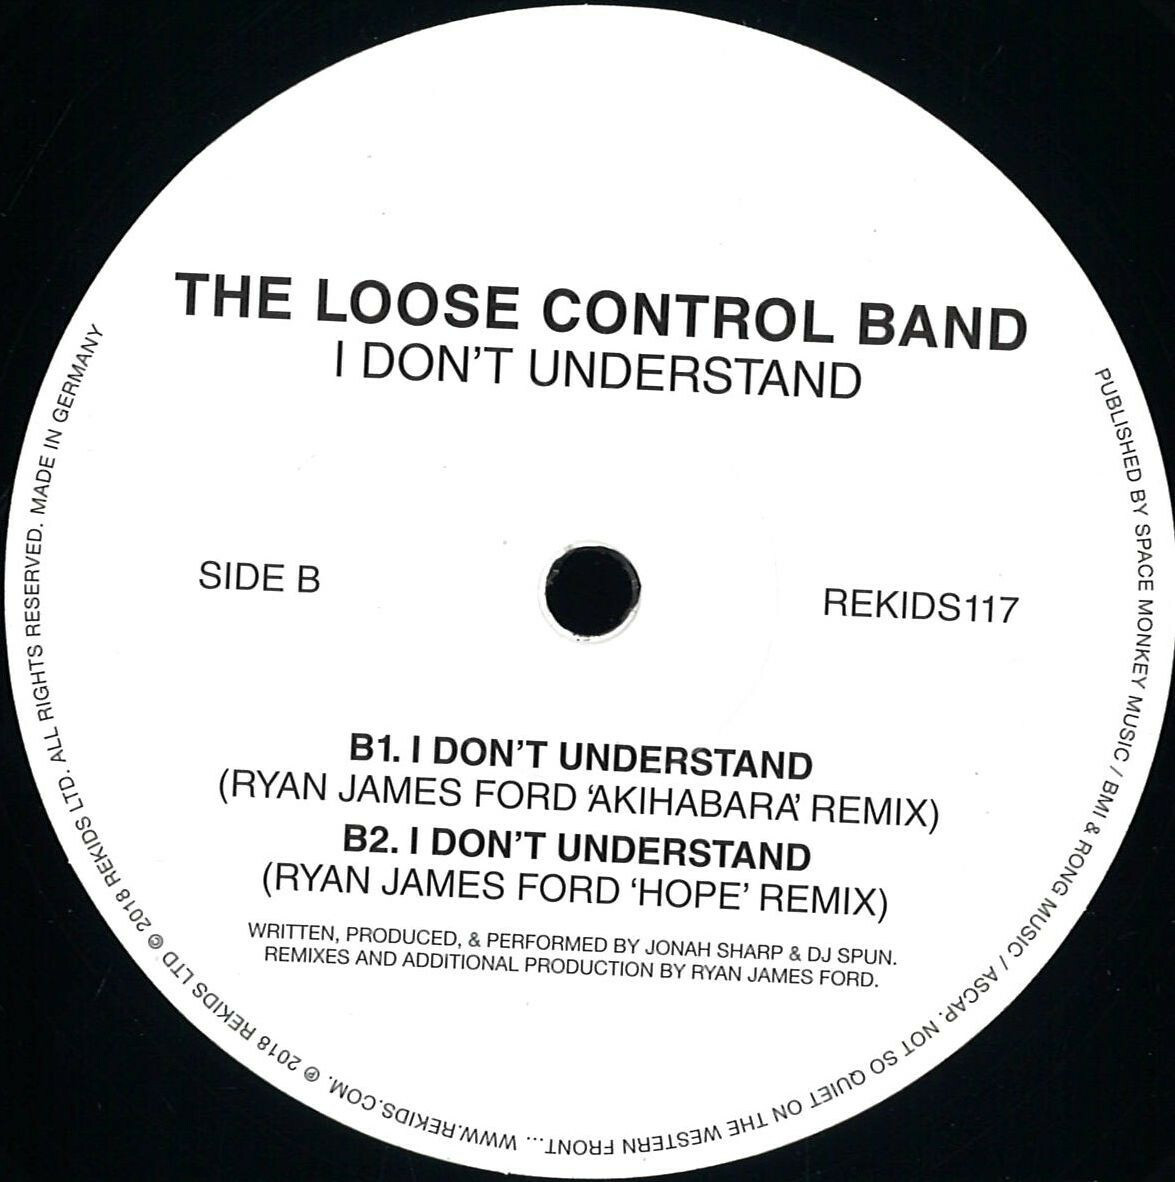 The Loose Control Band – I Don’t Understand (Rekids)